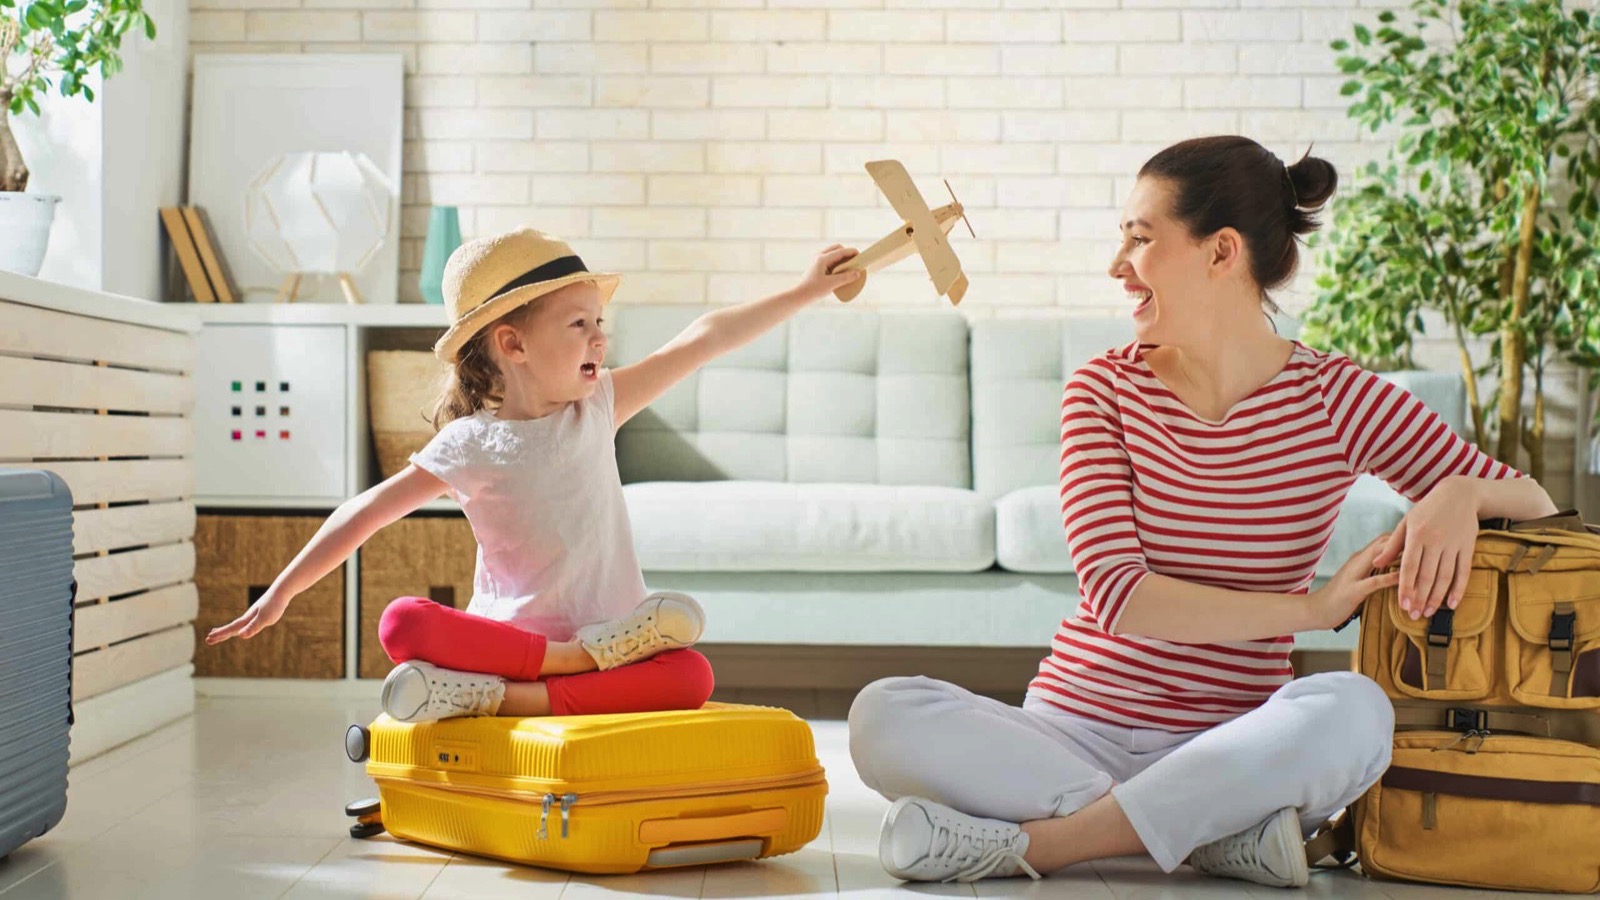 <p>One parent offered the option of informing your child of the coming events. Yes, they are toddlers and may not show it, but they comprehend very well if you take your time and explain it to them. This user added they bought their toddler "a book about a kid flying on a plane.</p><p>We read it often and talked about each part of the trip, from packing to getting off and changing planes, then getting off and finding Grandma." And they also bought a big pack of earplugs for the passengers around them on the flight in case things didn't work out with the book.</p>